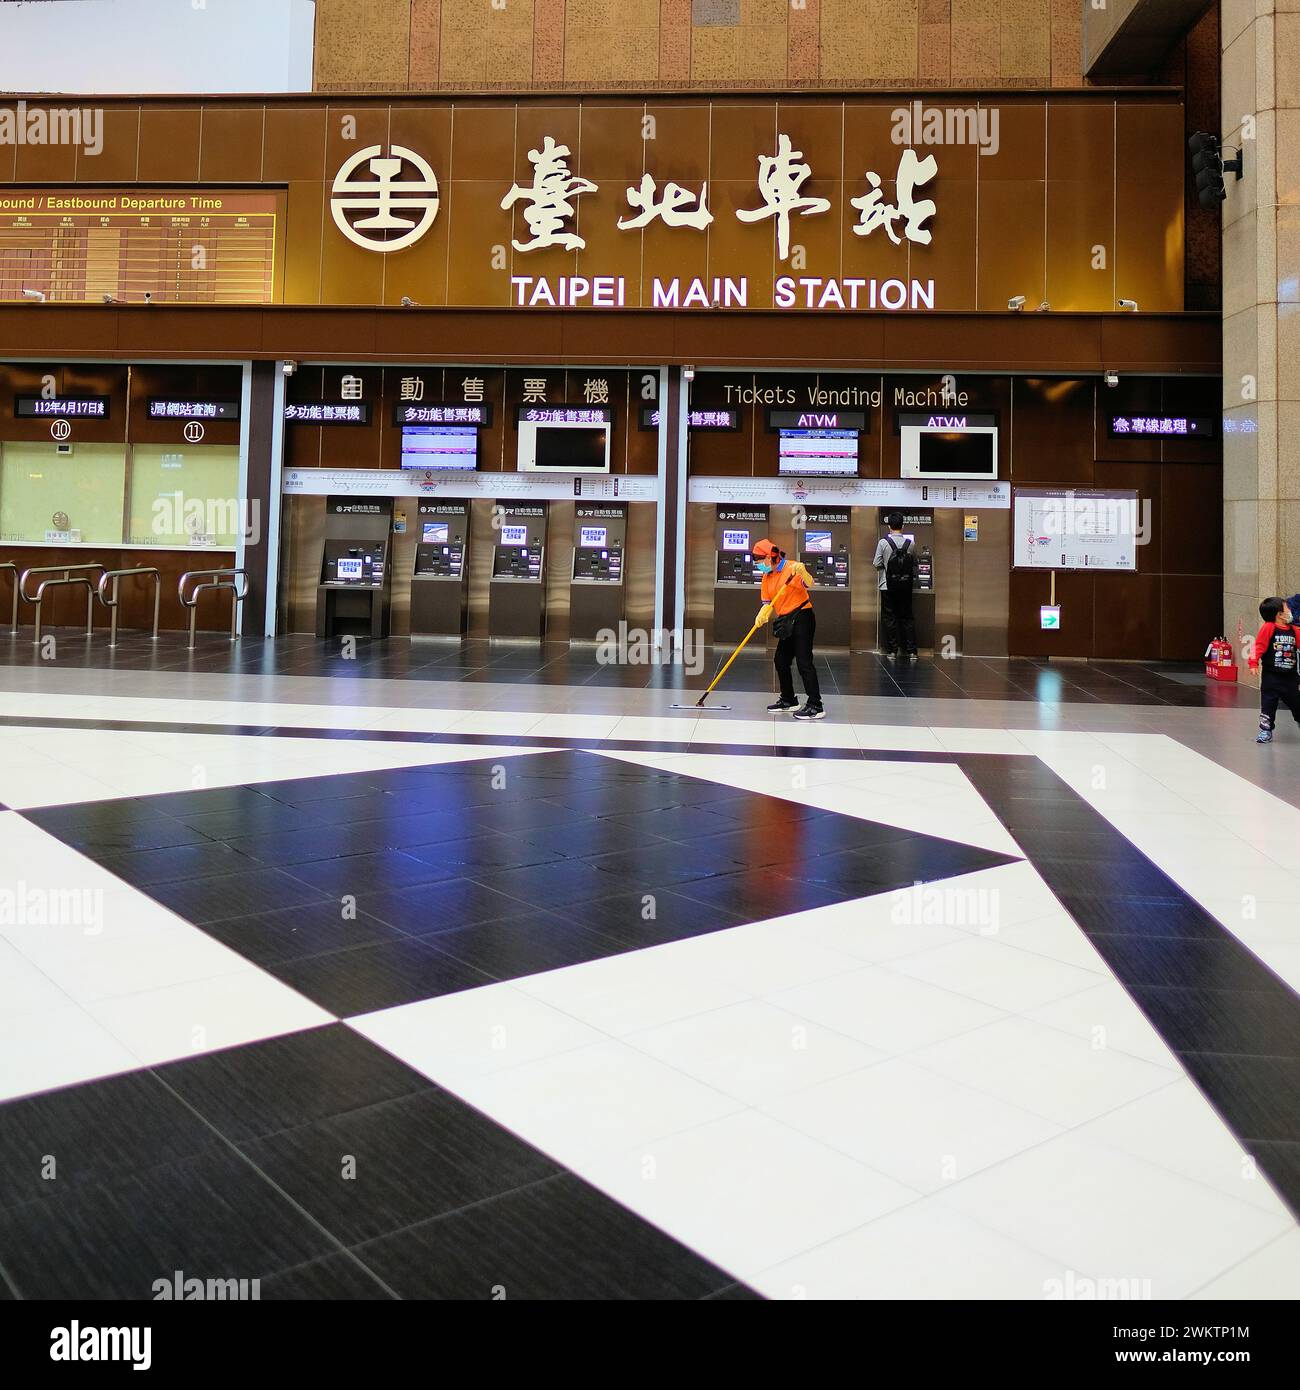 Automated ticket vending machines in the main concourse at Taipei Main Station in Taiwan; ATVM and customers, travelers, tourists, custodian sweeping. Stock Photo